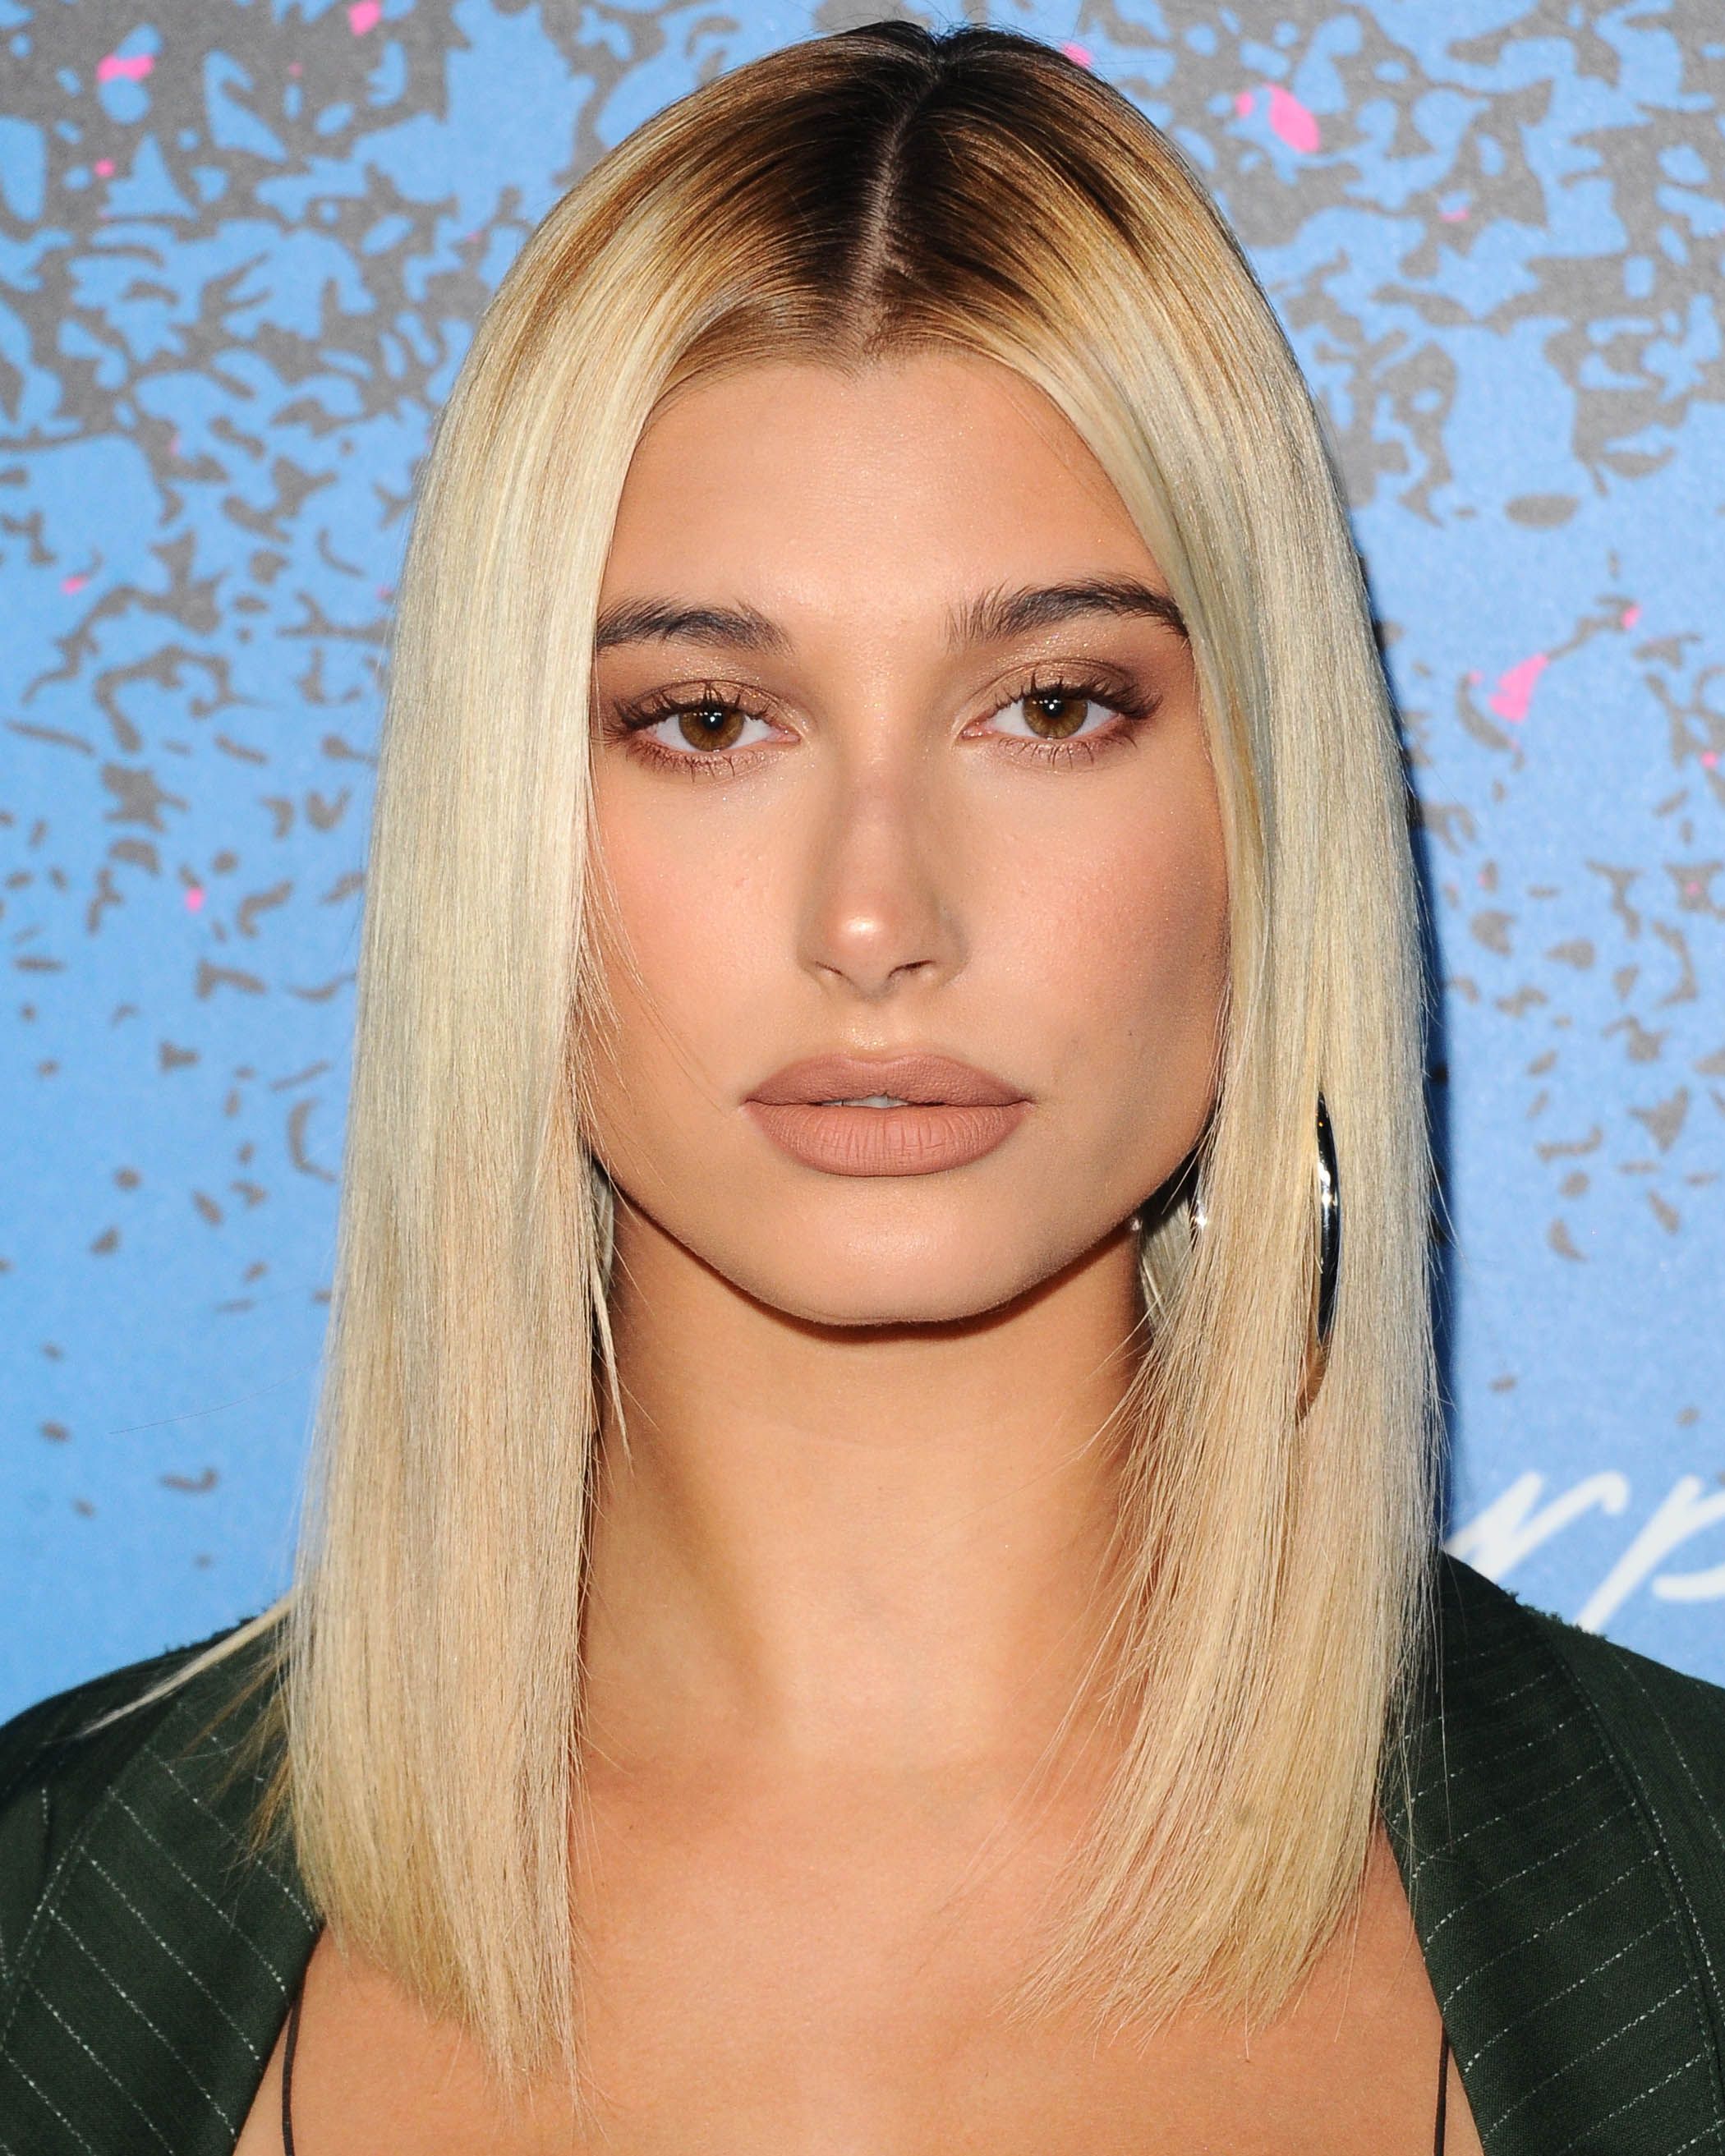 The Most Flattering Medium-Length Brown Hairstyles